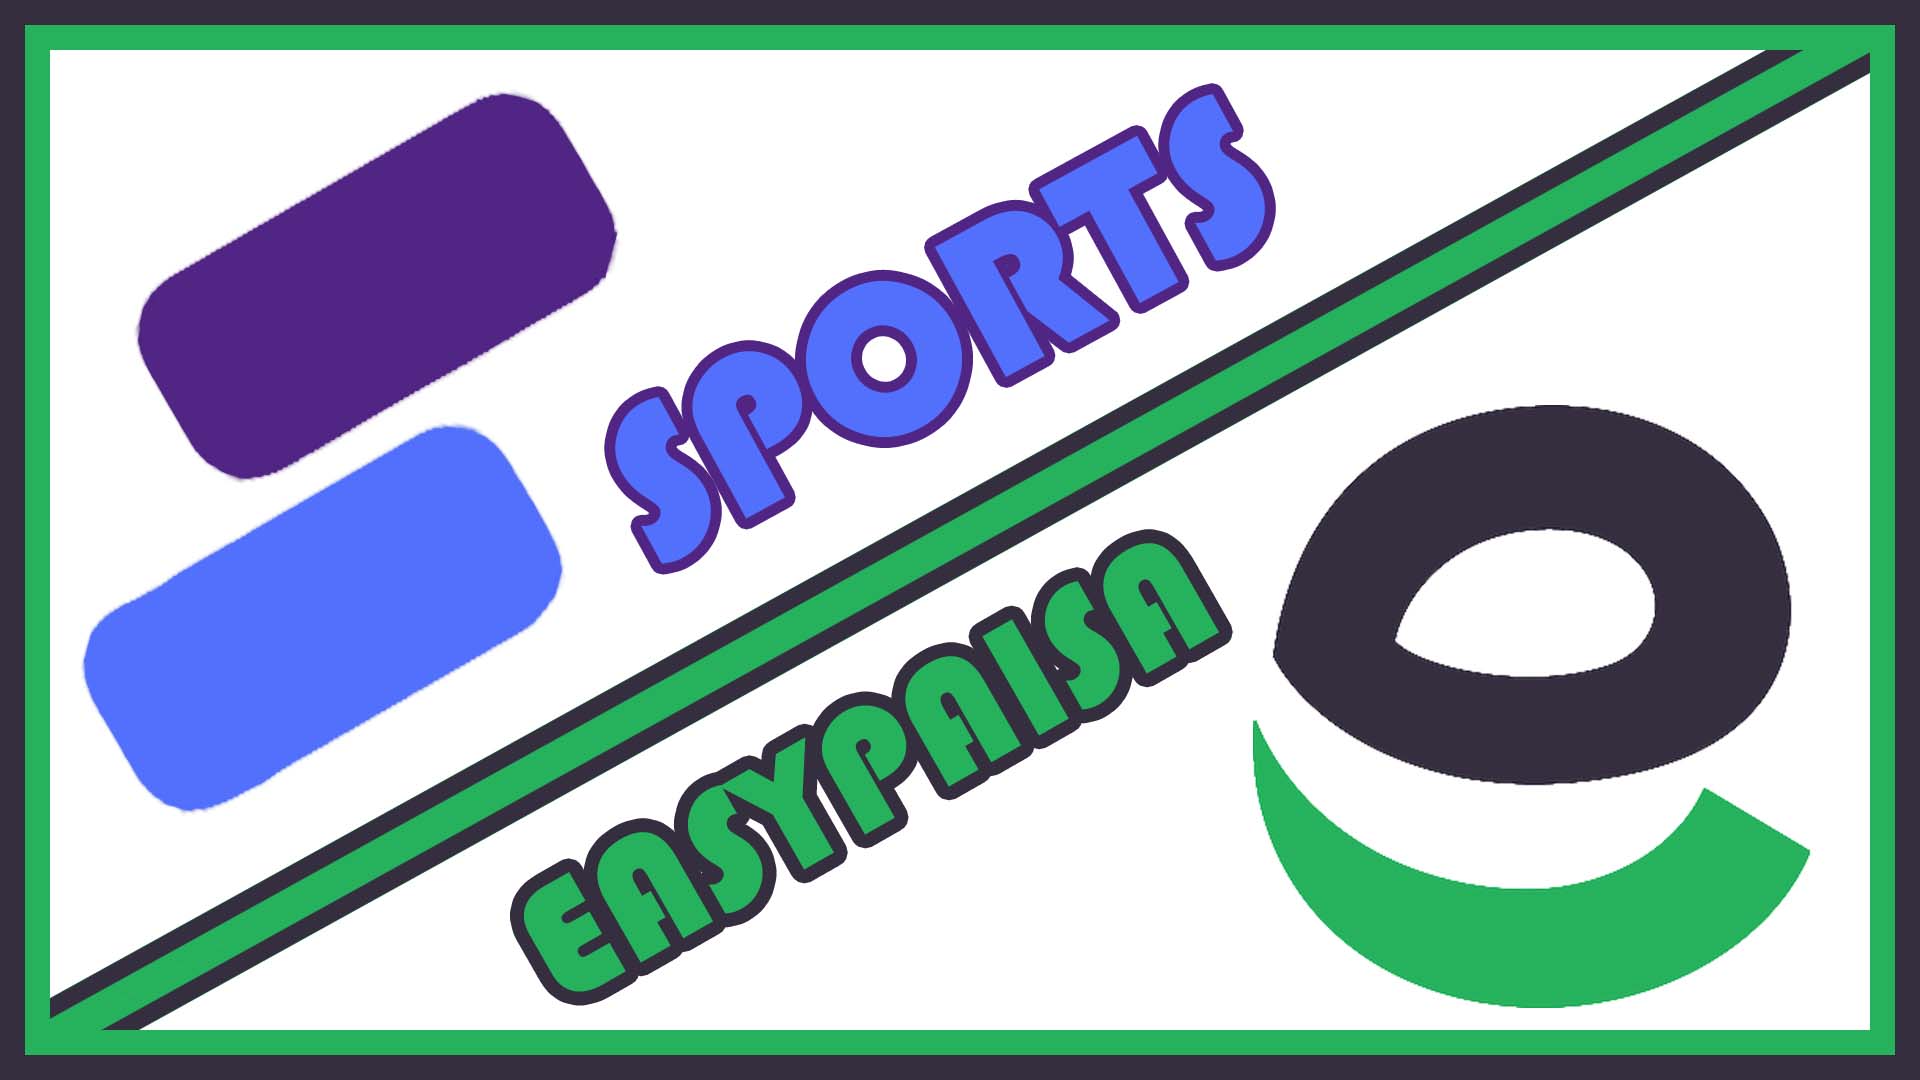 Buy Sportstalksocial with easypaisa Sell Sportstalksocial with easypaisa.jpg